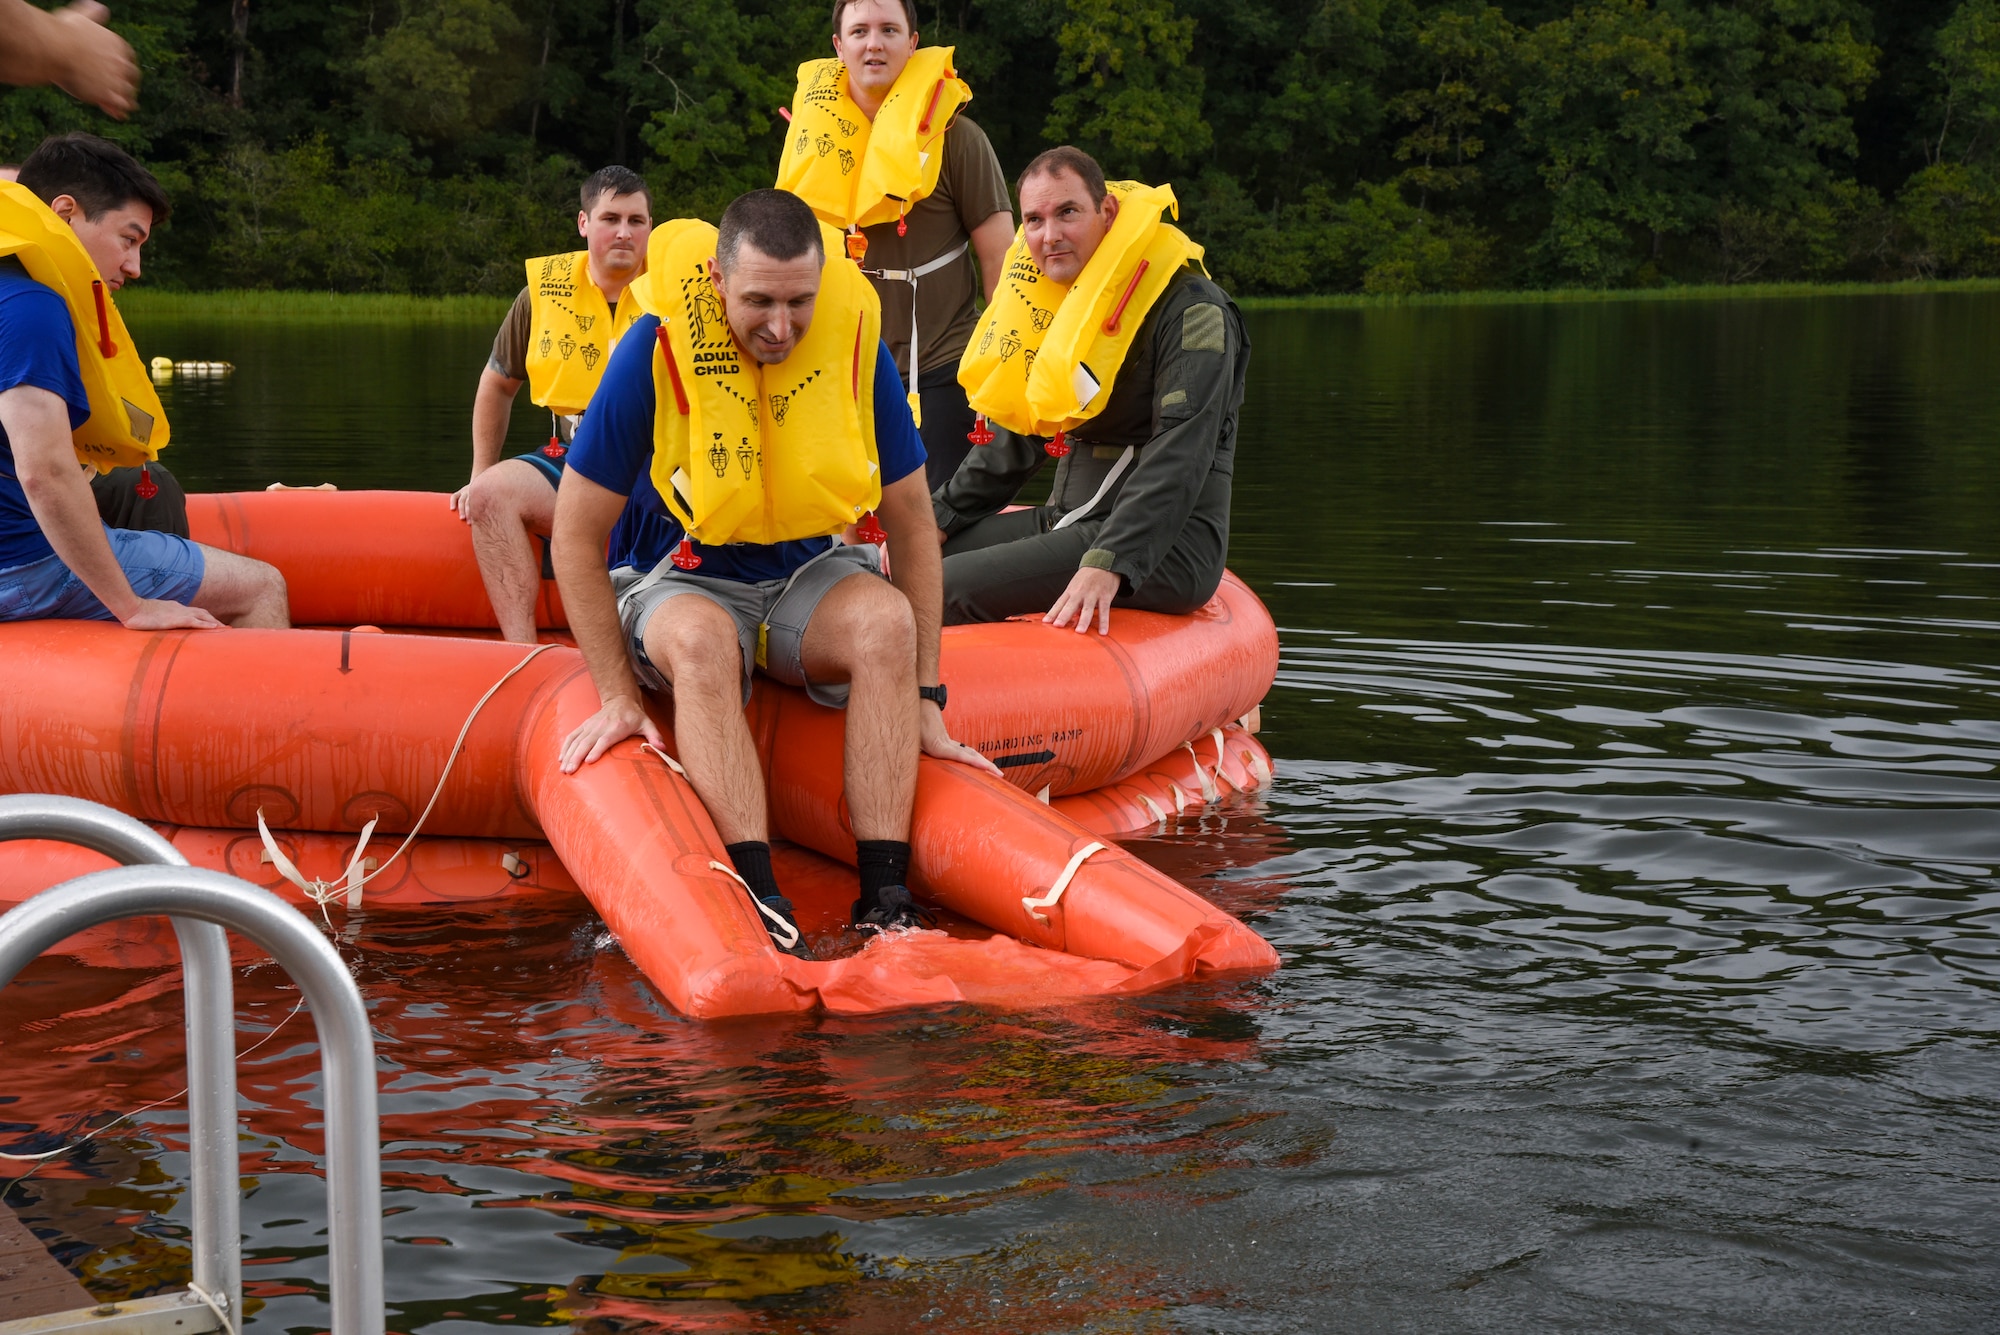 An airman prepares to go into the water during water survival training.